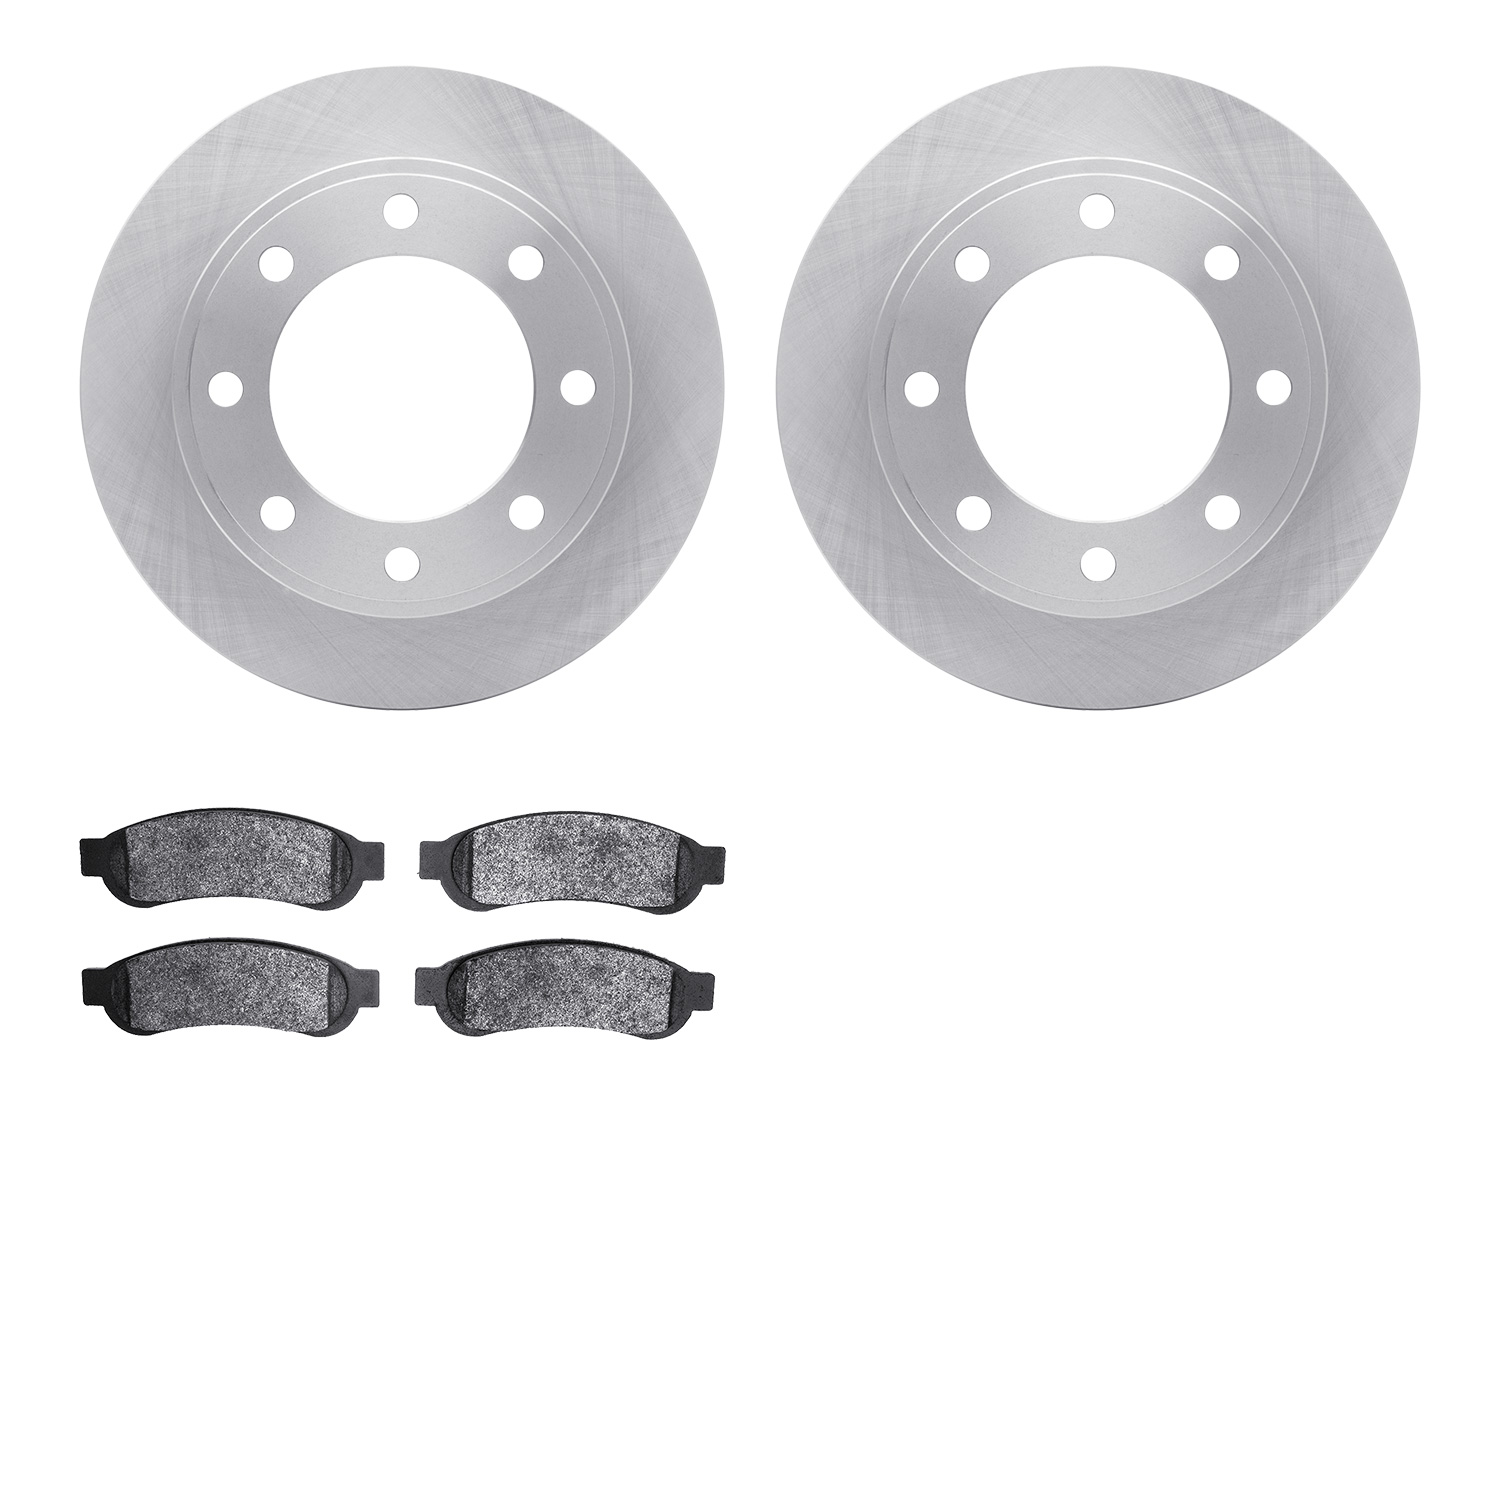 6402-54244 Brake Rotors with Ultimate-Duty Brake Pads, 2010-2012 Ford/Lincoln/Mercury/Mazda, Position: Rear